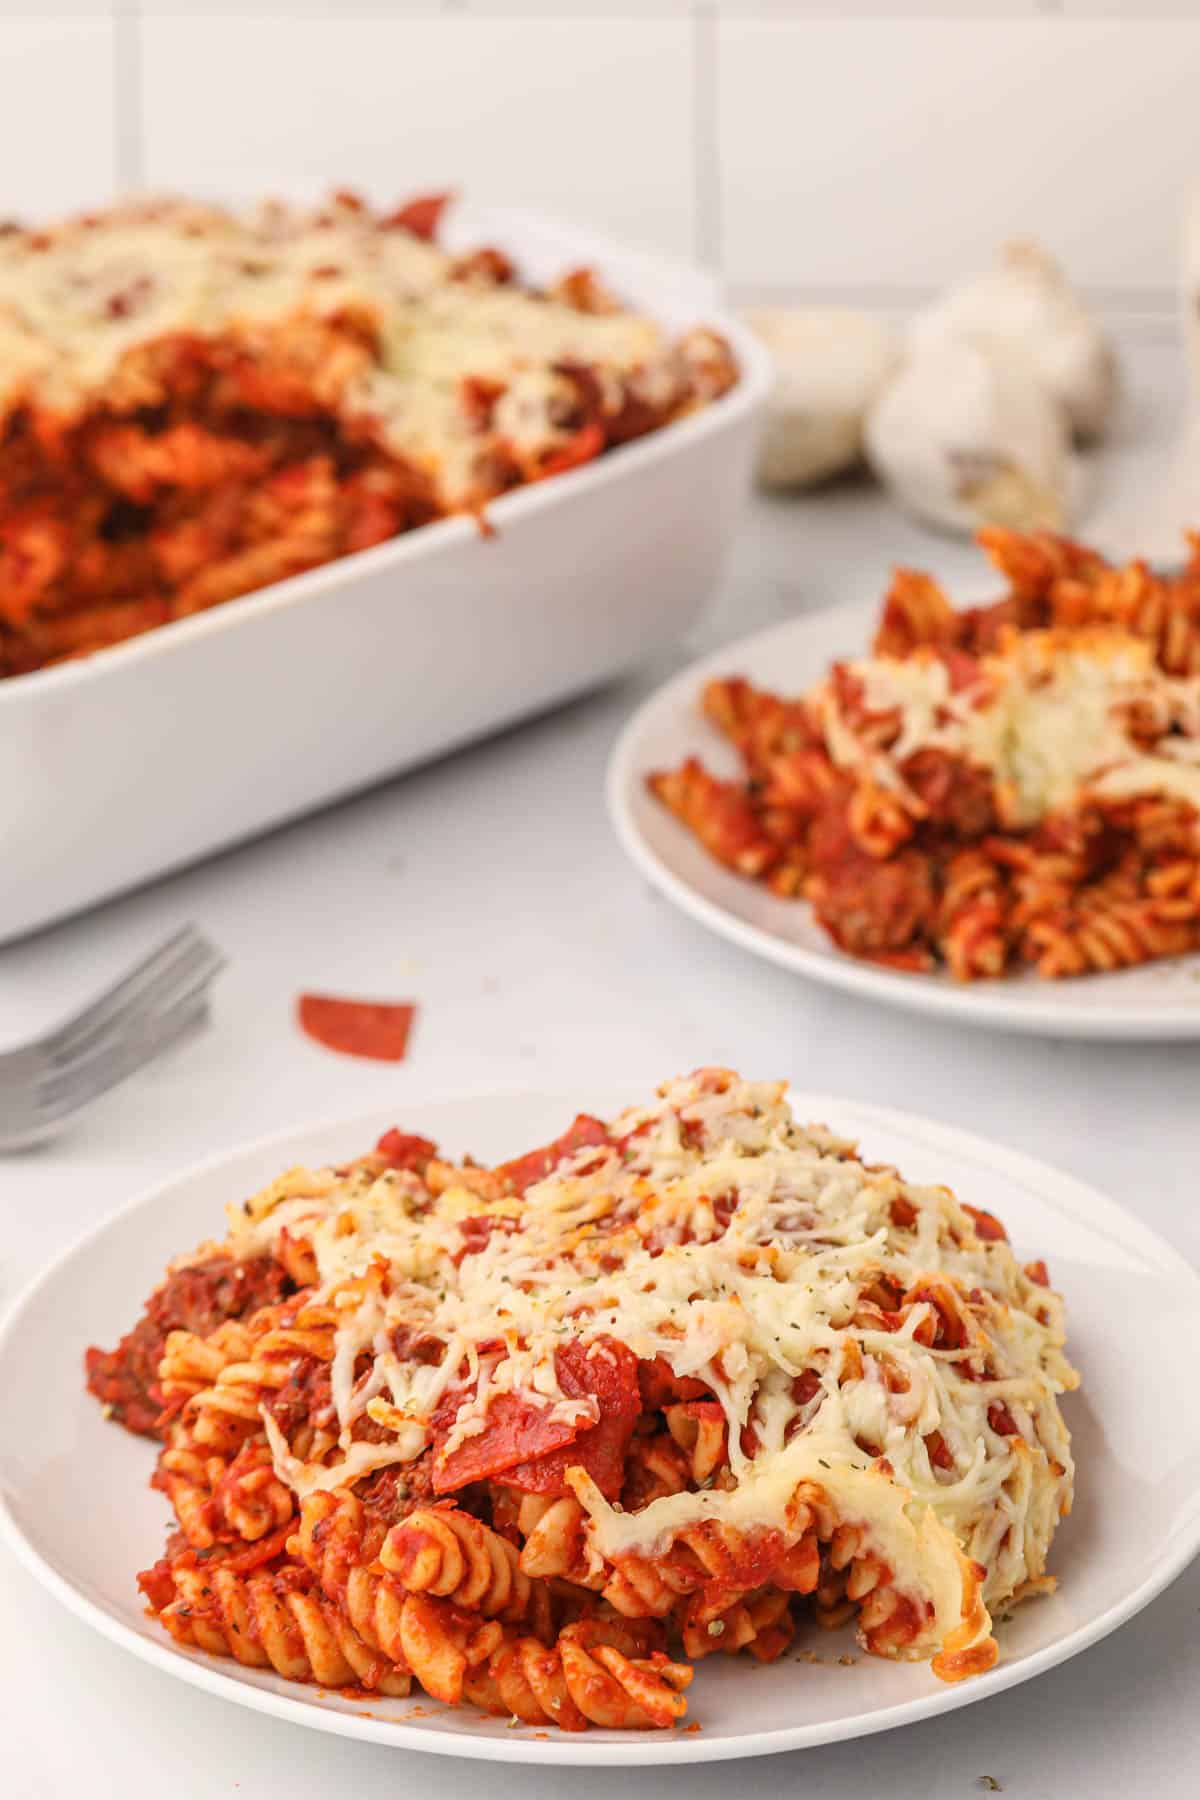 A serving of pizza pasta on a white plate in front of the rest of the casserole and another serving.